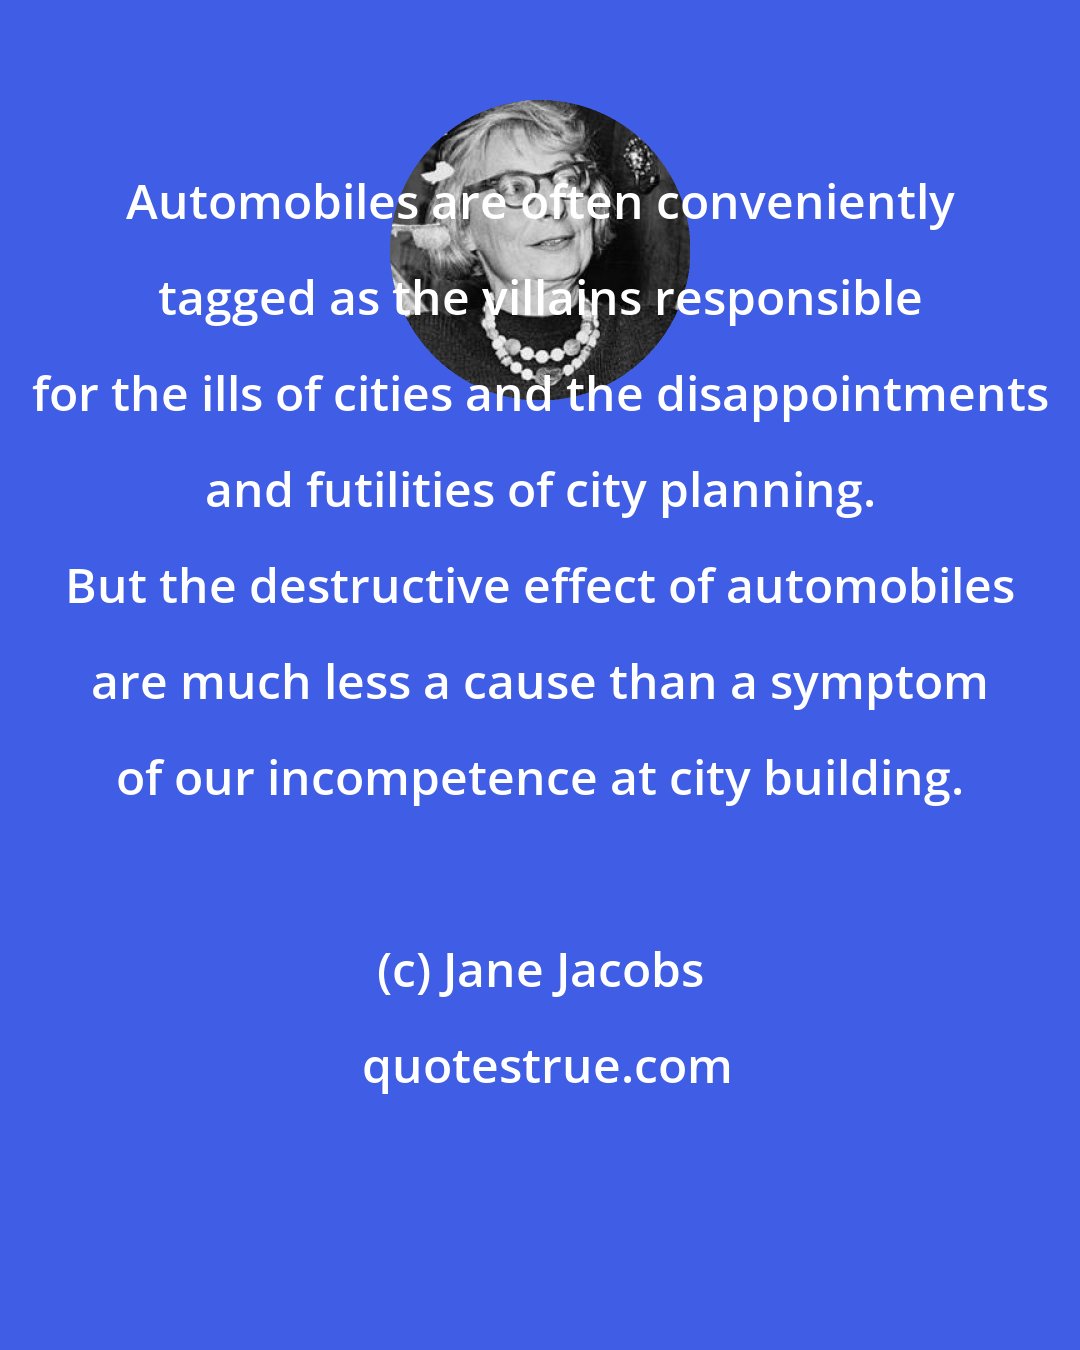 Jane Jacobs: Automobiles are often conveniently tagged as the villains responsible for the ills of cities and the disappointments and futilities of city planning. But the destructive effect of automobiles are much less a cause than a symptom of our incompetence at city building.